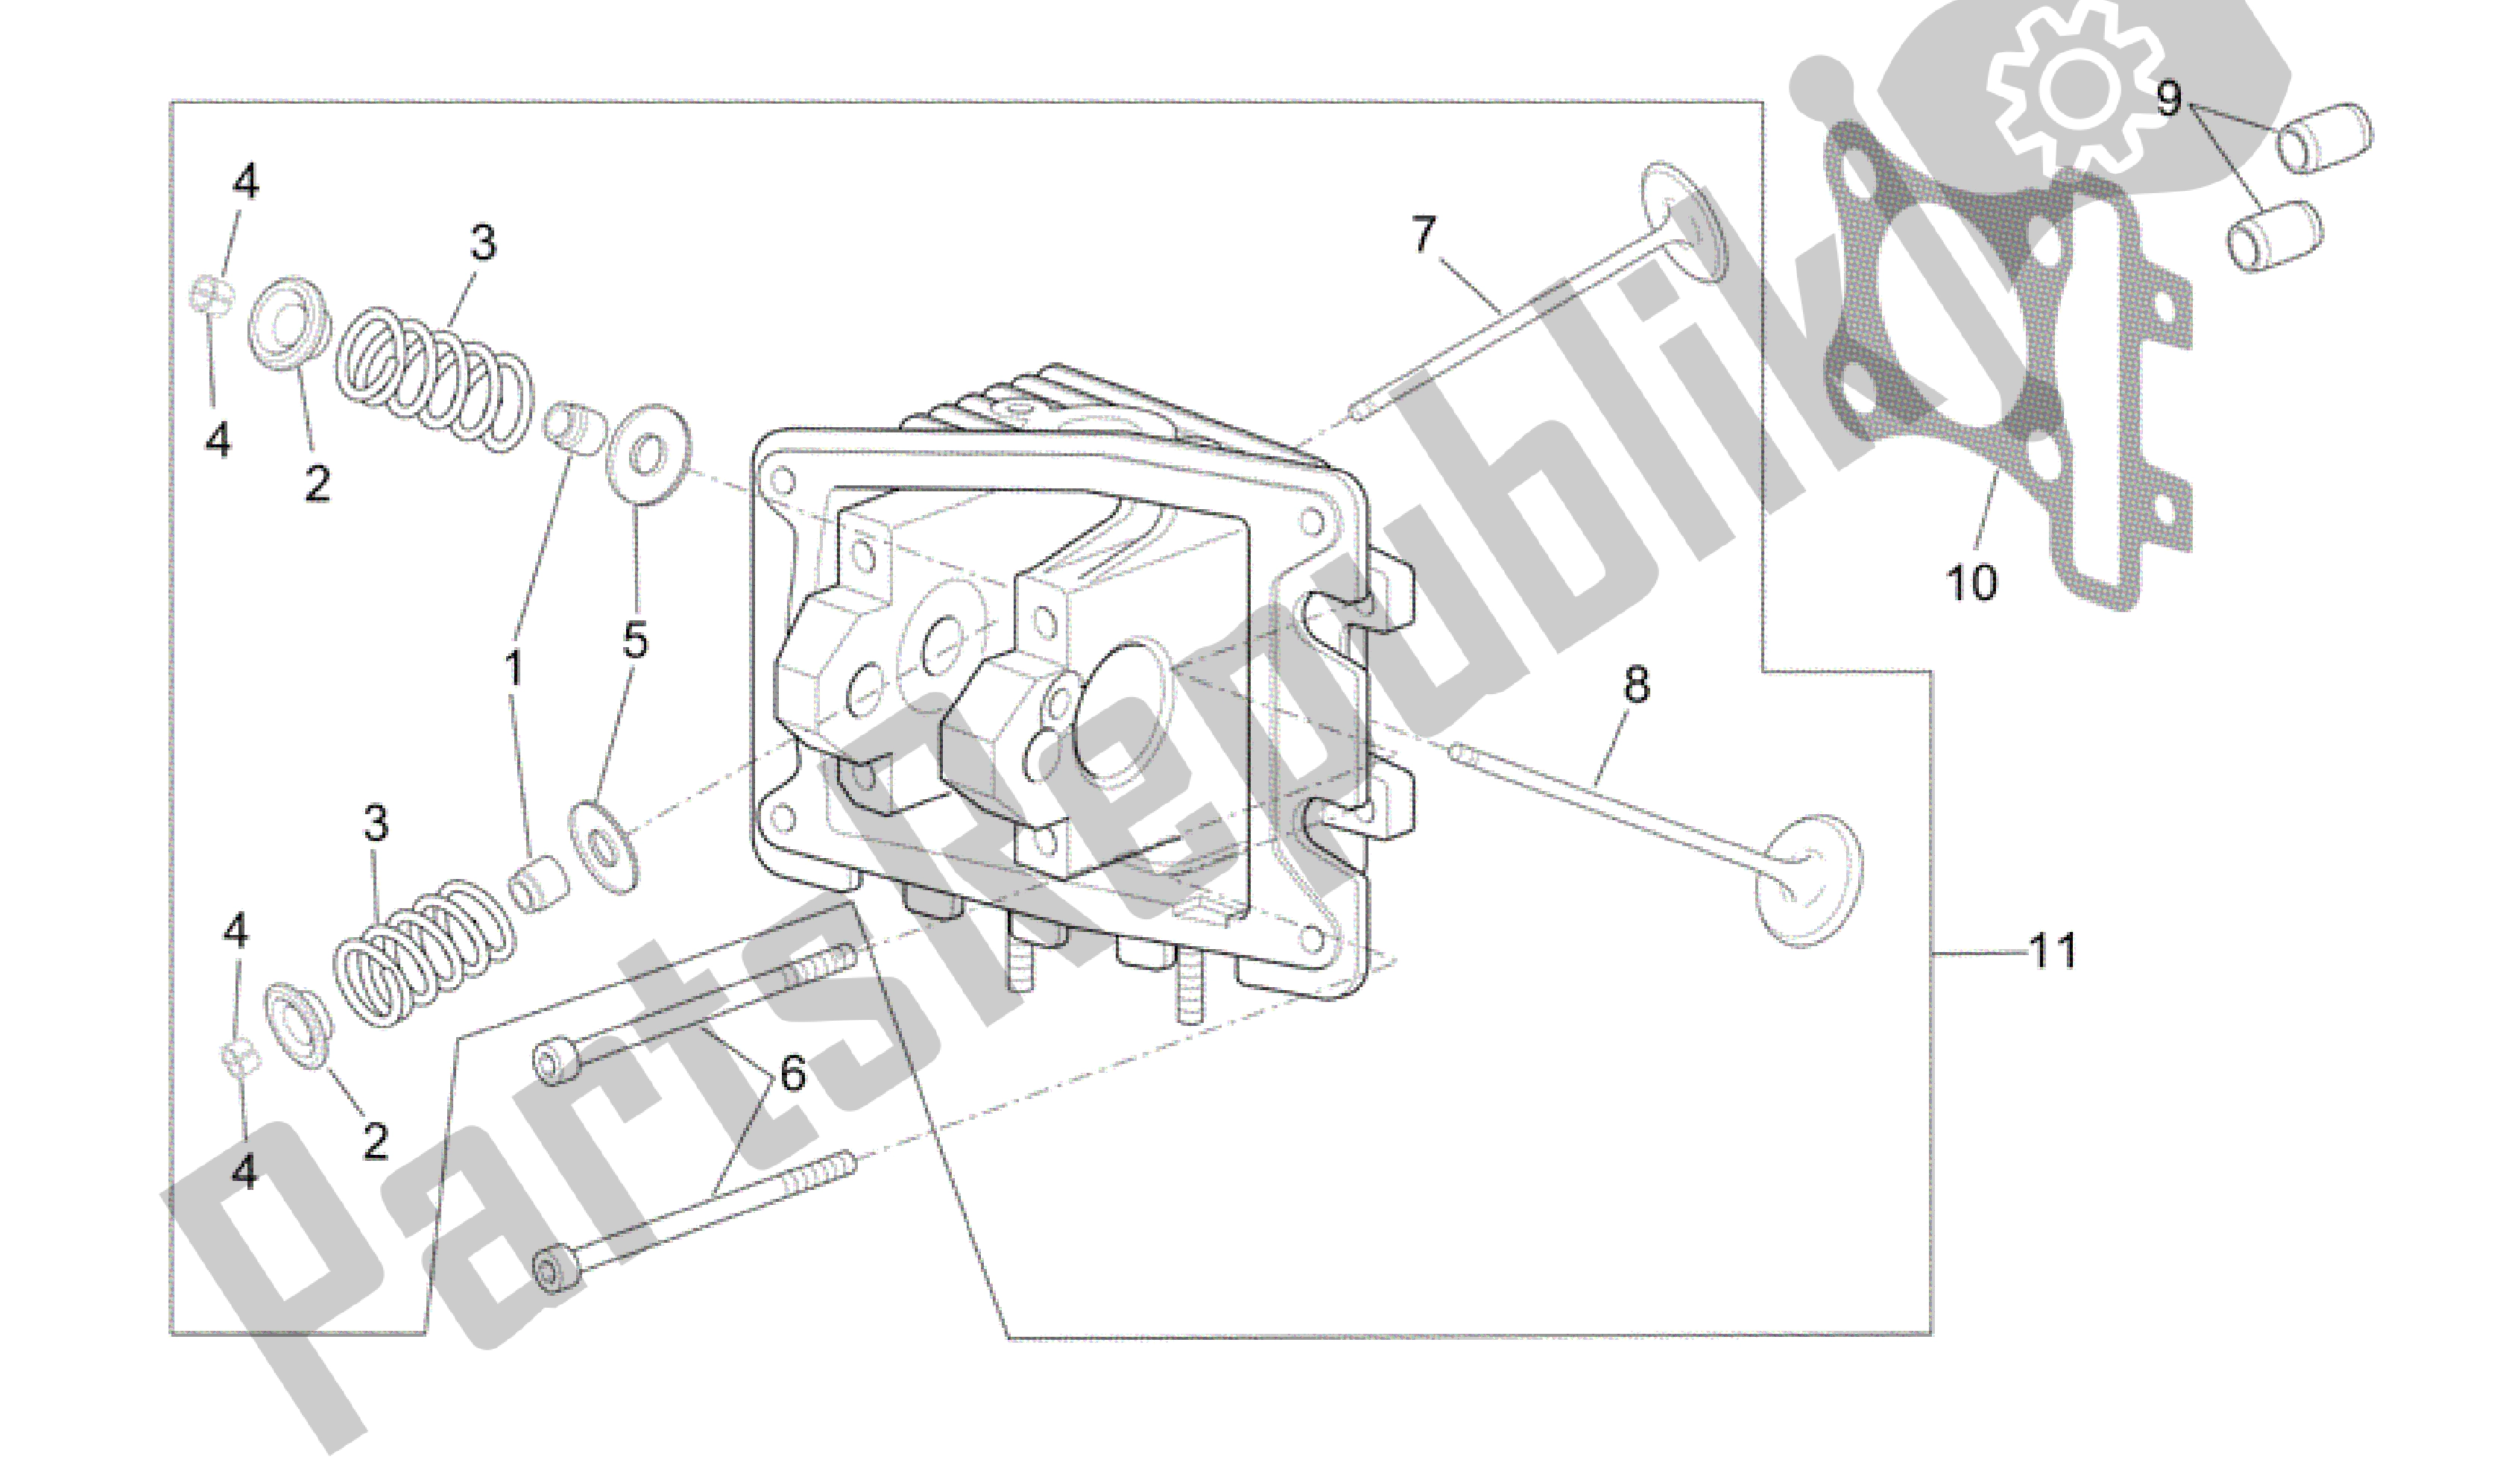 All parts for the Cylinder Head - Valves of the Aprilia Scarabeo 50 2006 - 2009